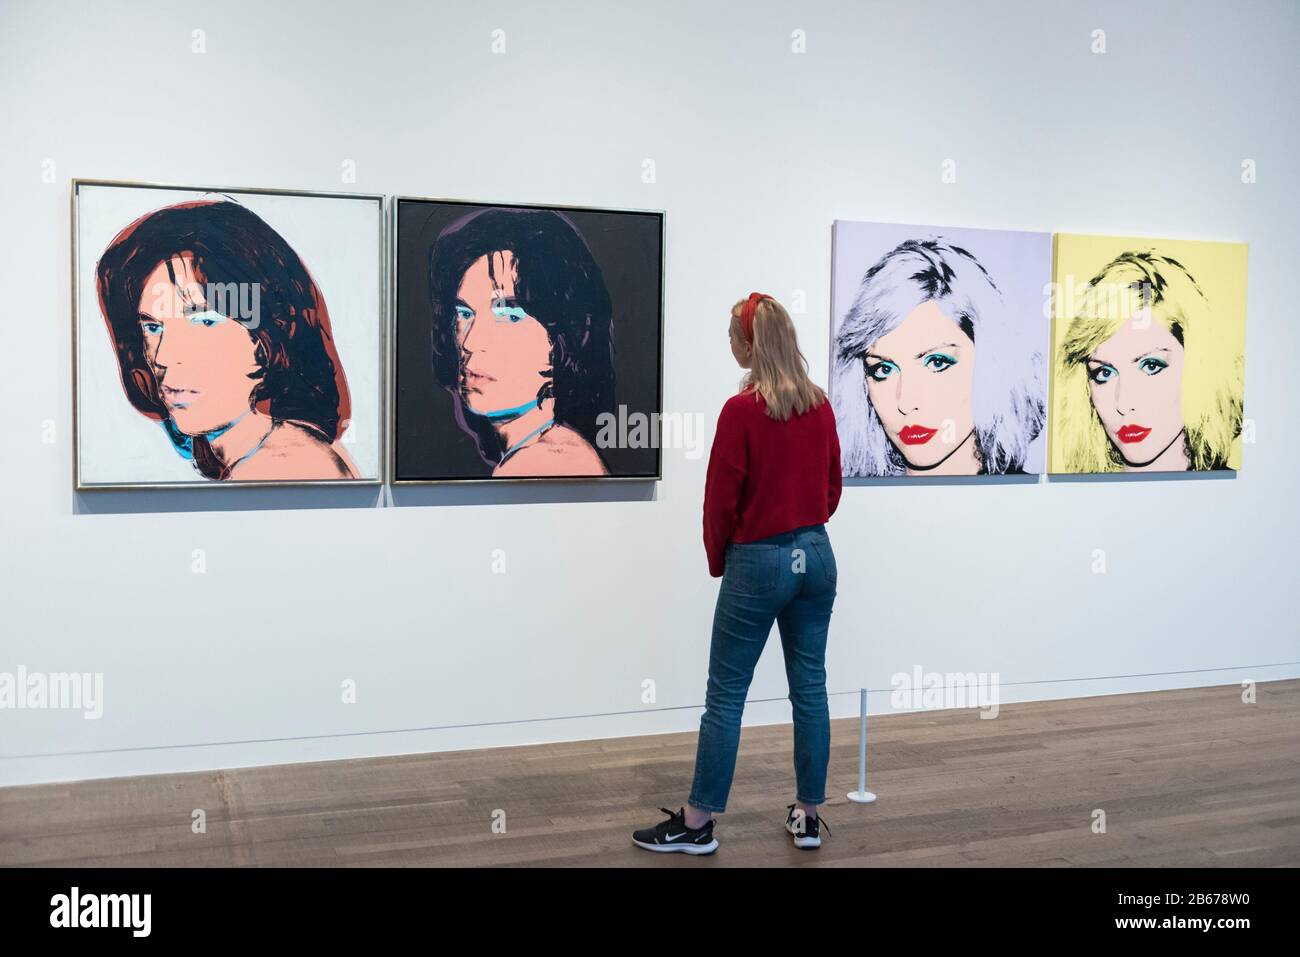 London, UK.  10 March 2020. A staff member poses next to (L to R) 'Mick Jagger' and 'Debbie Harry', 1980, both by Andy Warhol. Preview of 'Andy Warhol', a retrospective of over 100 works by one of the most recognisable artists of the late 20th century.  The exhibition runs 12 March to 6 September 2020 at Tate Modern. Credit: Stephen Chung / Alamy Live News Stock Photo